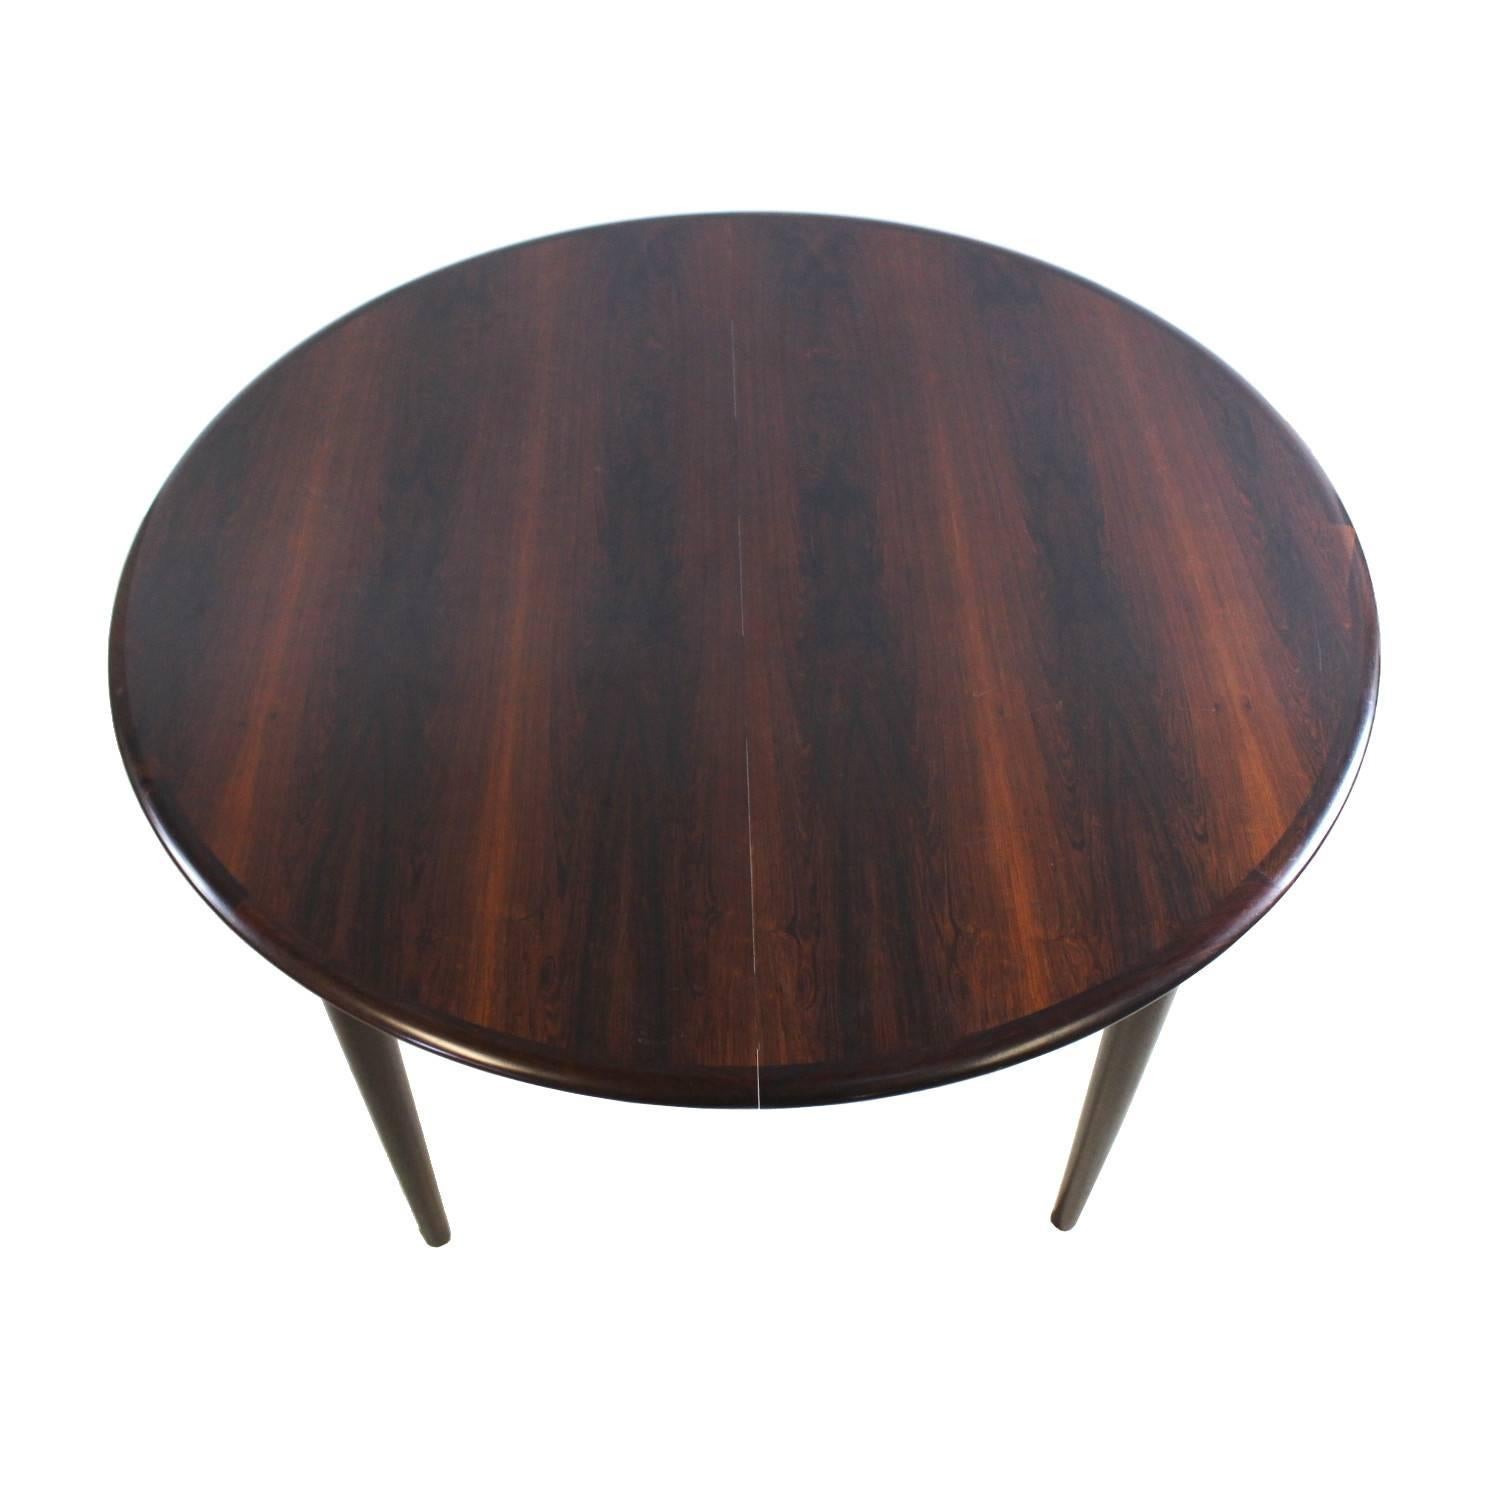 Scandinavian dining table manufactured by Skovmand and Andersen in the 1960s in Denmark. The table is made from rosewood and can seat four, six or eight people by using two extra leaves that would extend the table to a maximum size of 220cm.

 